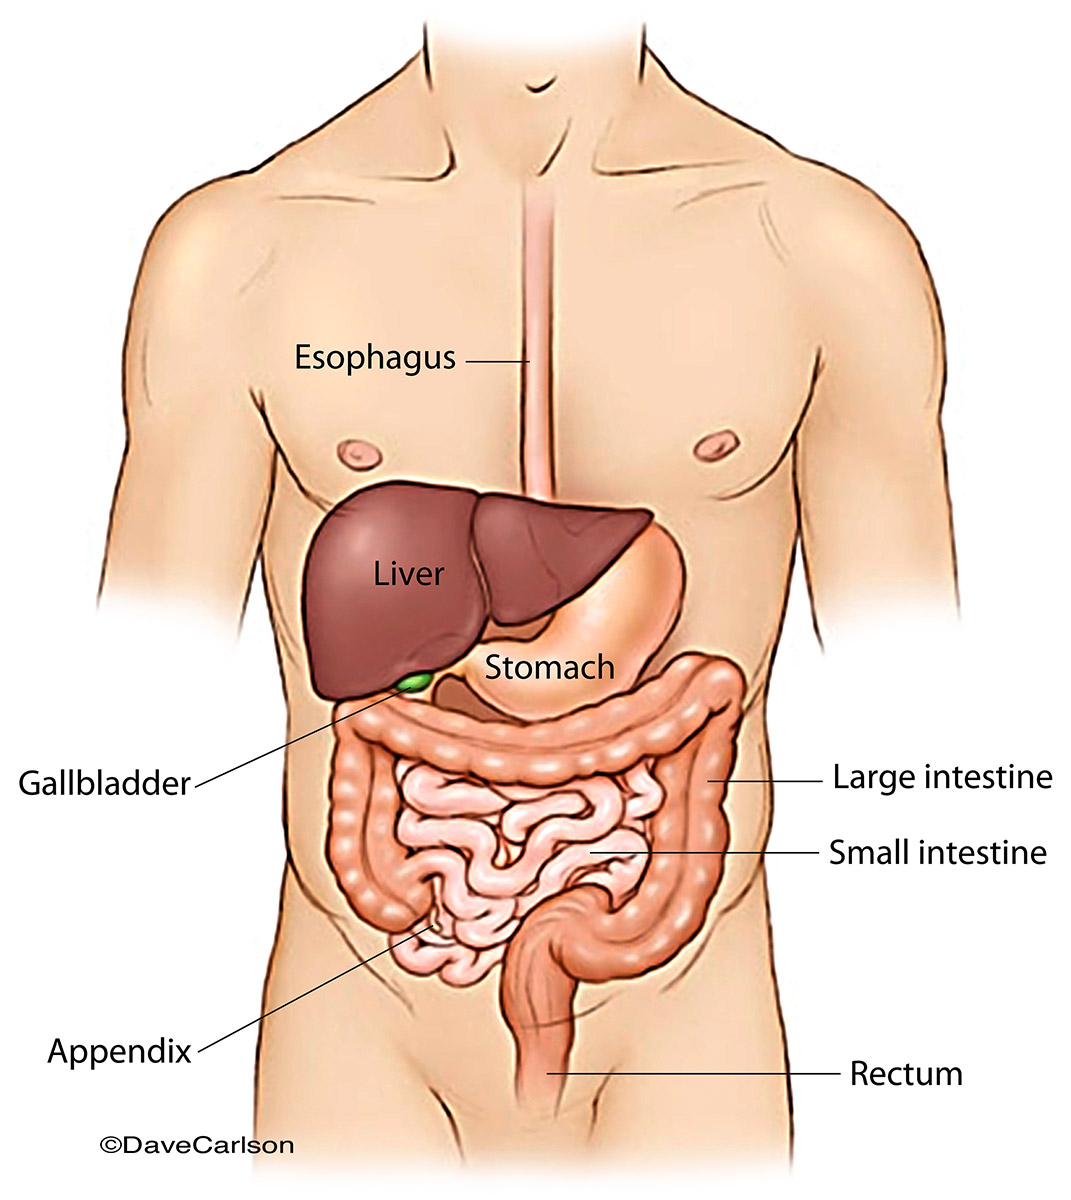 Generalized illustration of the digestive organs of the G.I. tract.